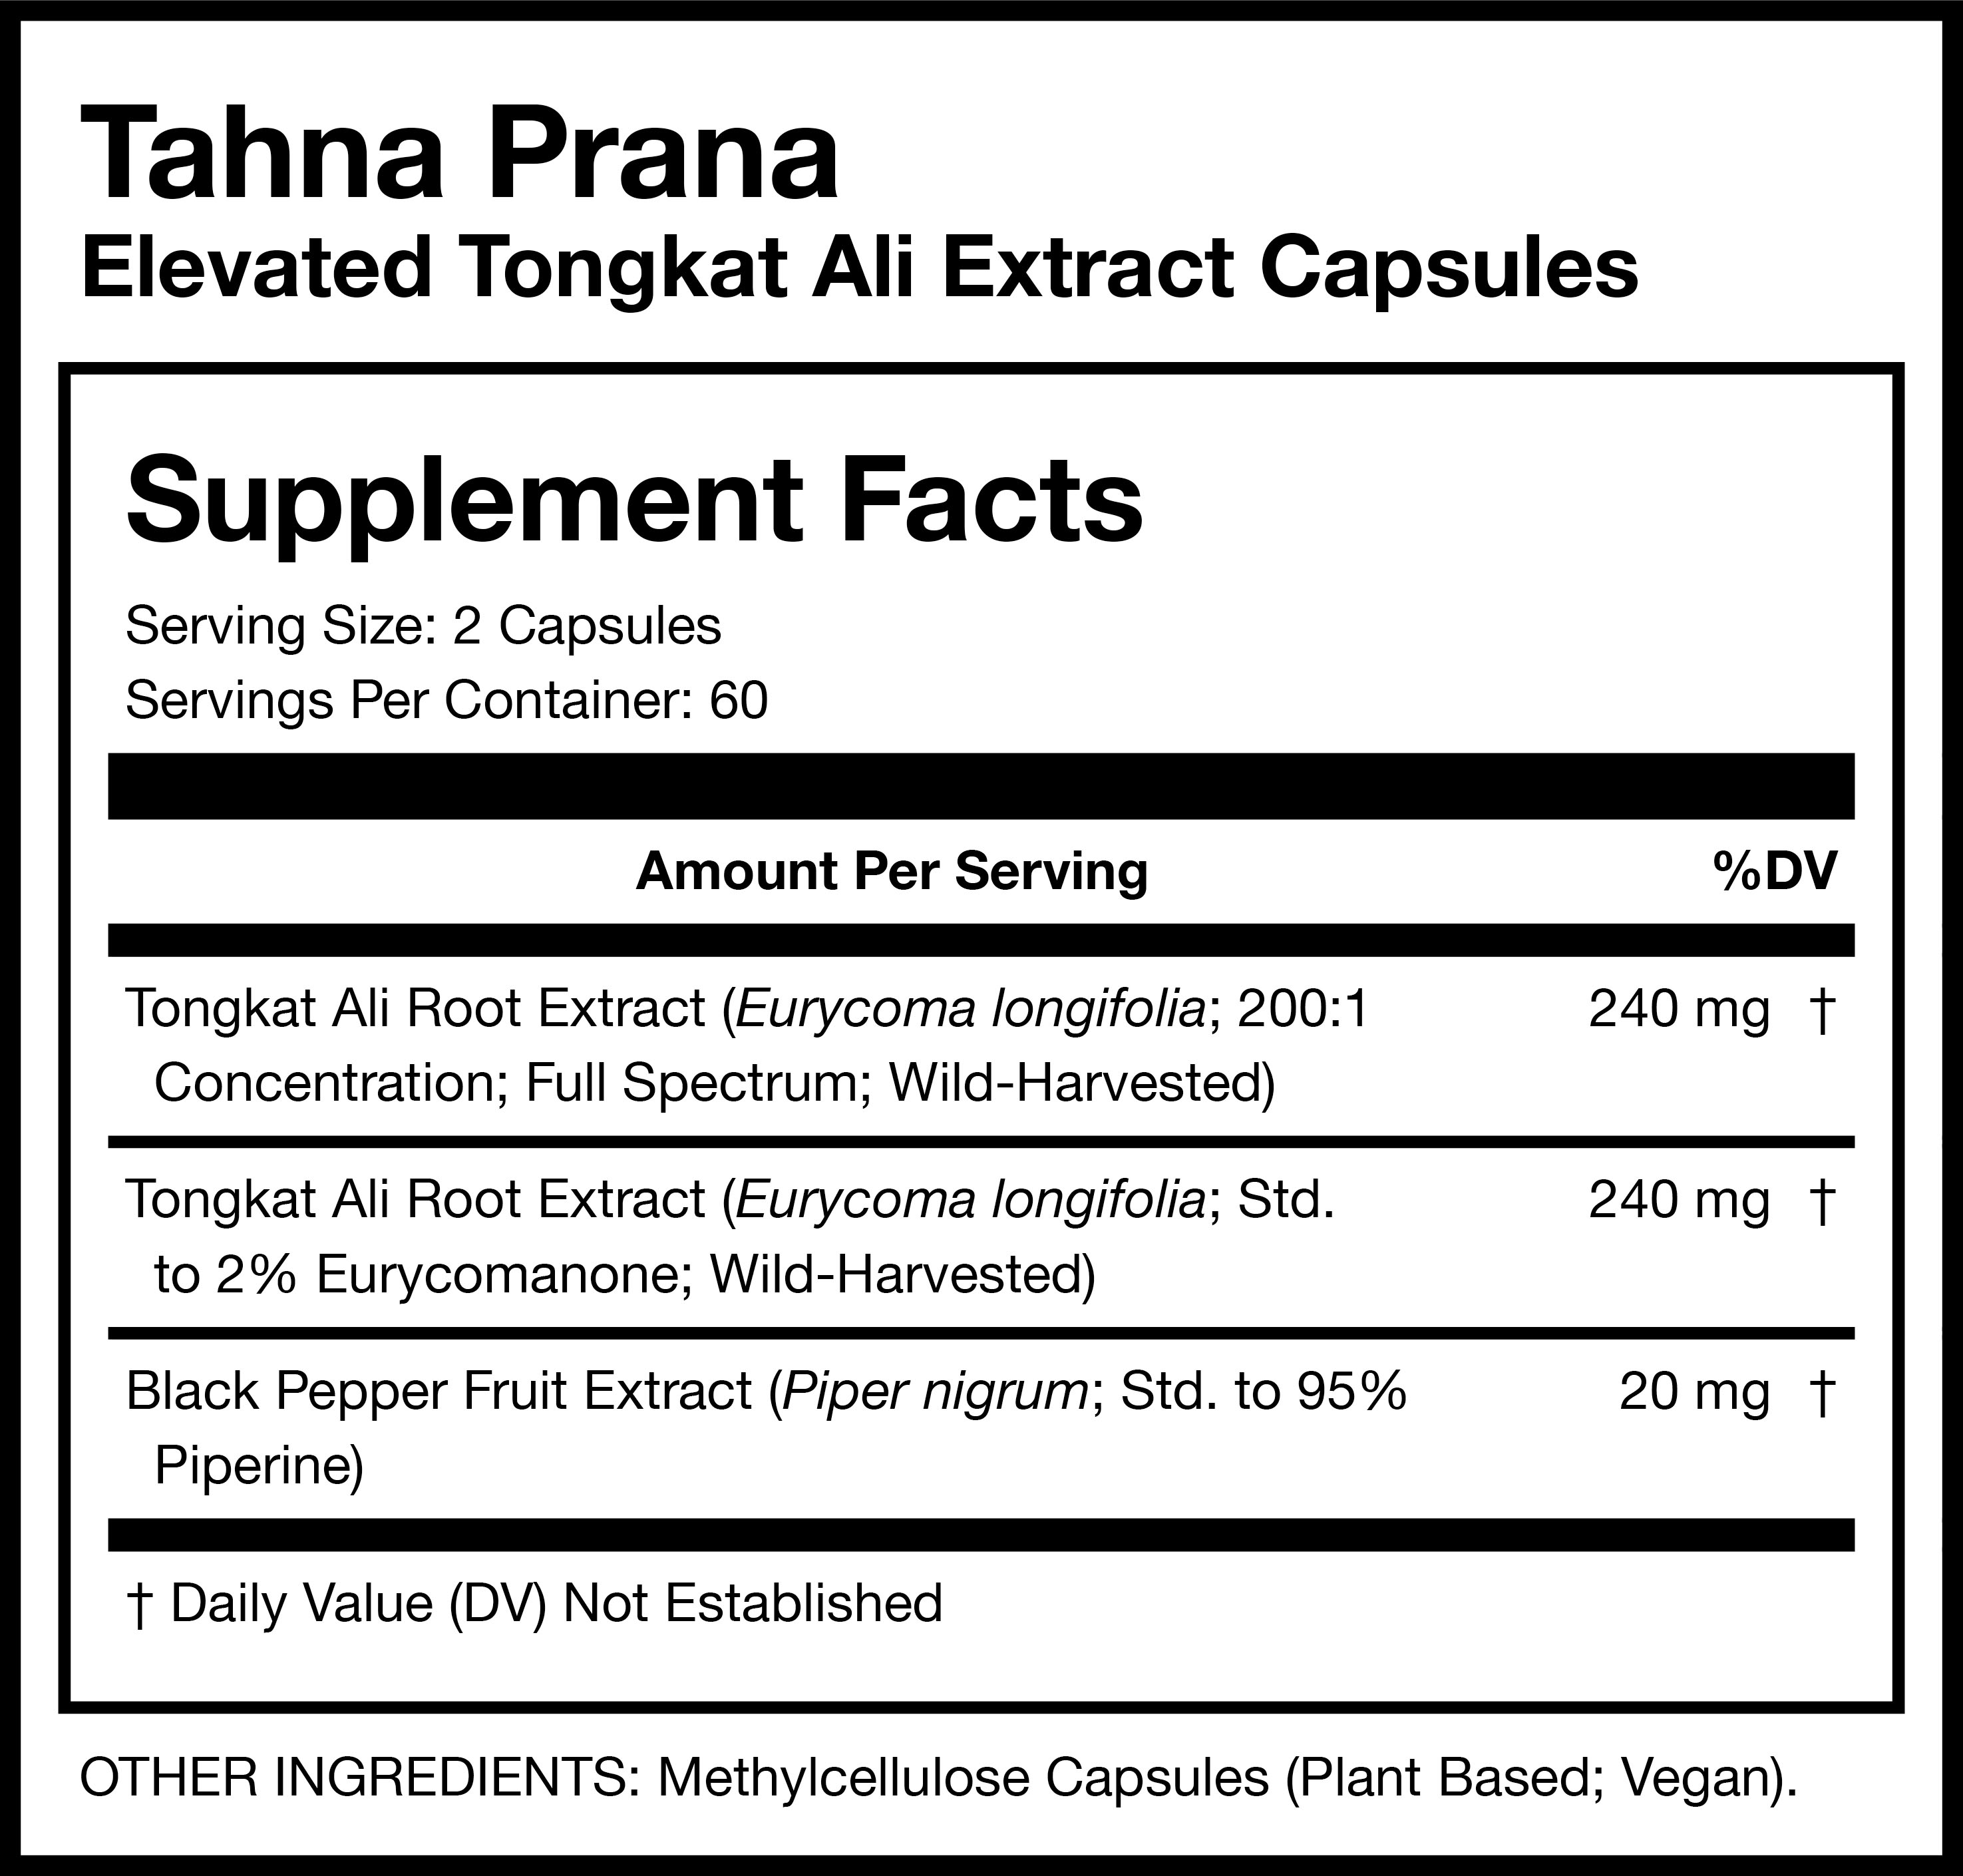 Tahna Prana Elevated Tongkat Ali Extract Capsules Supplement Facts Card